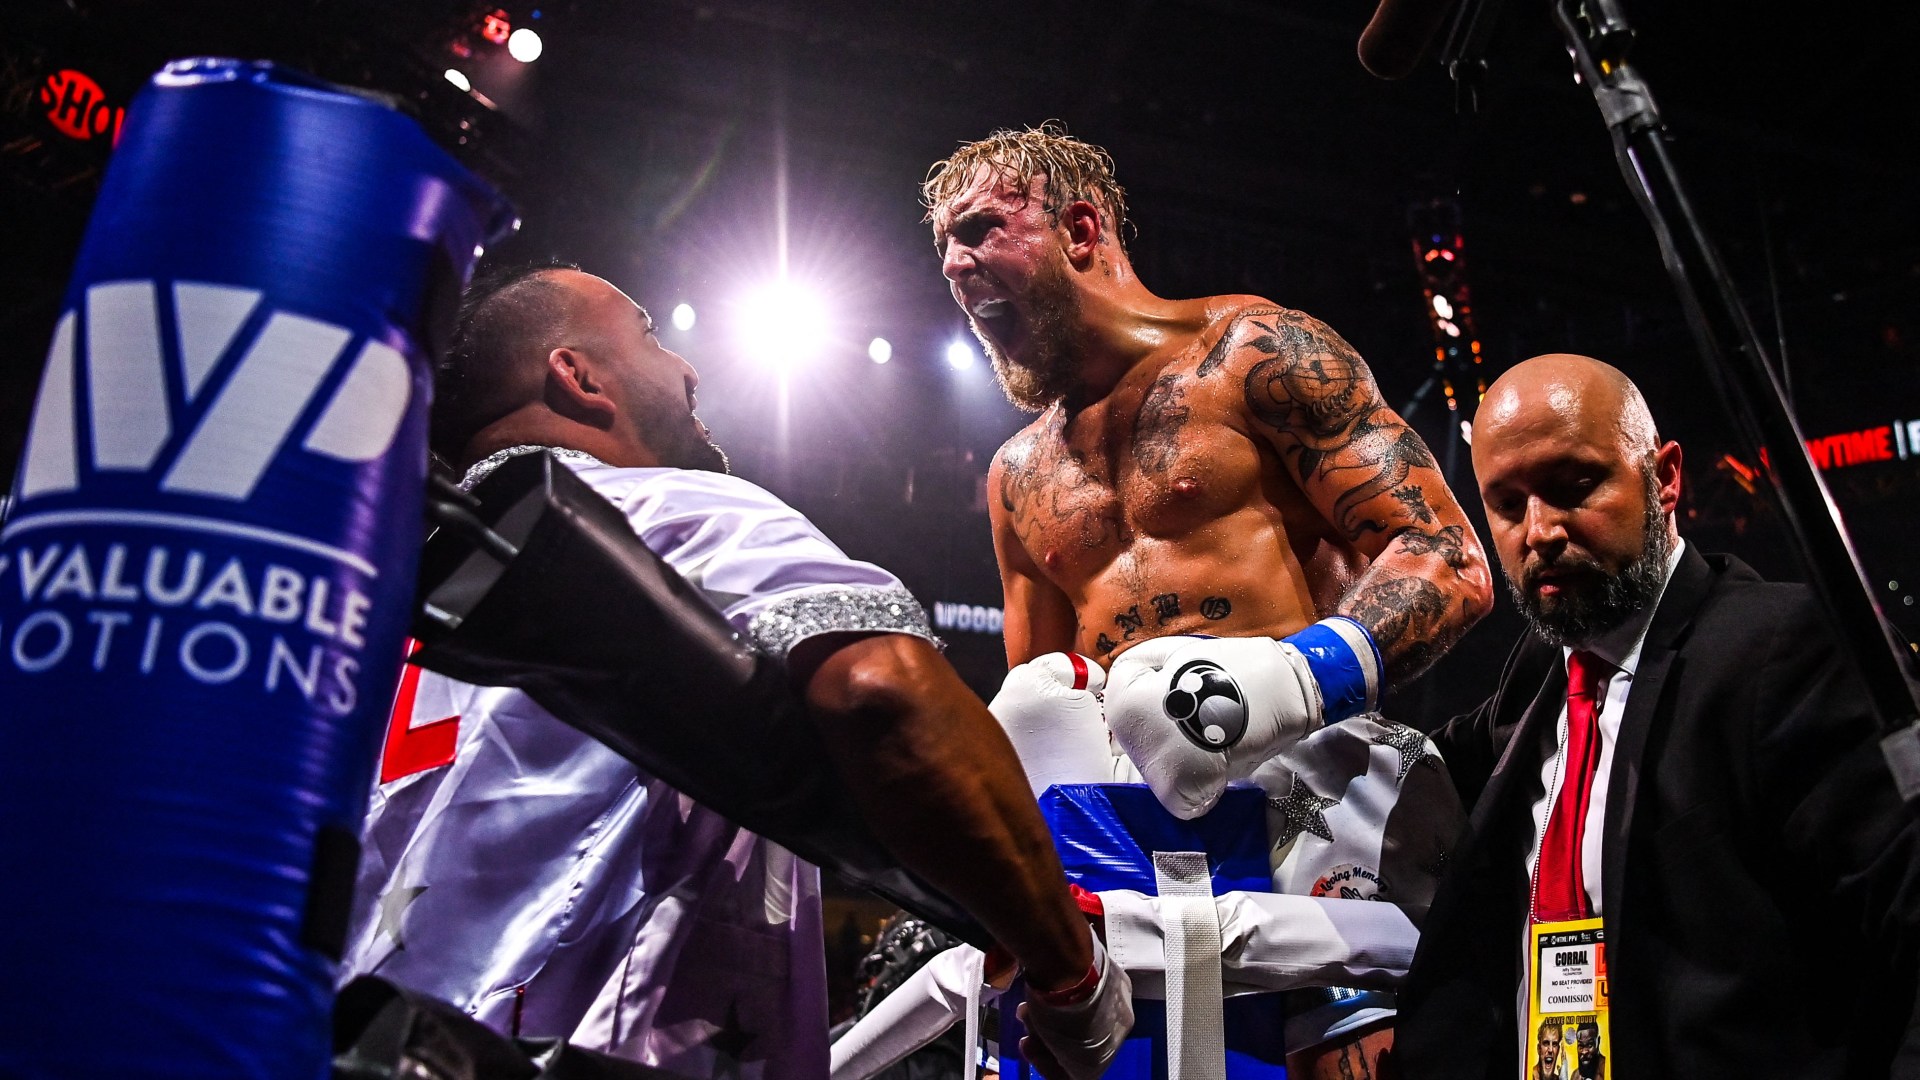 ‘One of us has to die’ – Jake Paul makes shocking Mike Tyson fight comment amid health fears for 57-year-old boxing icon [Video]